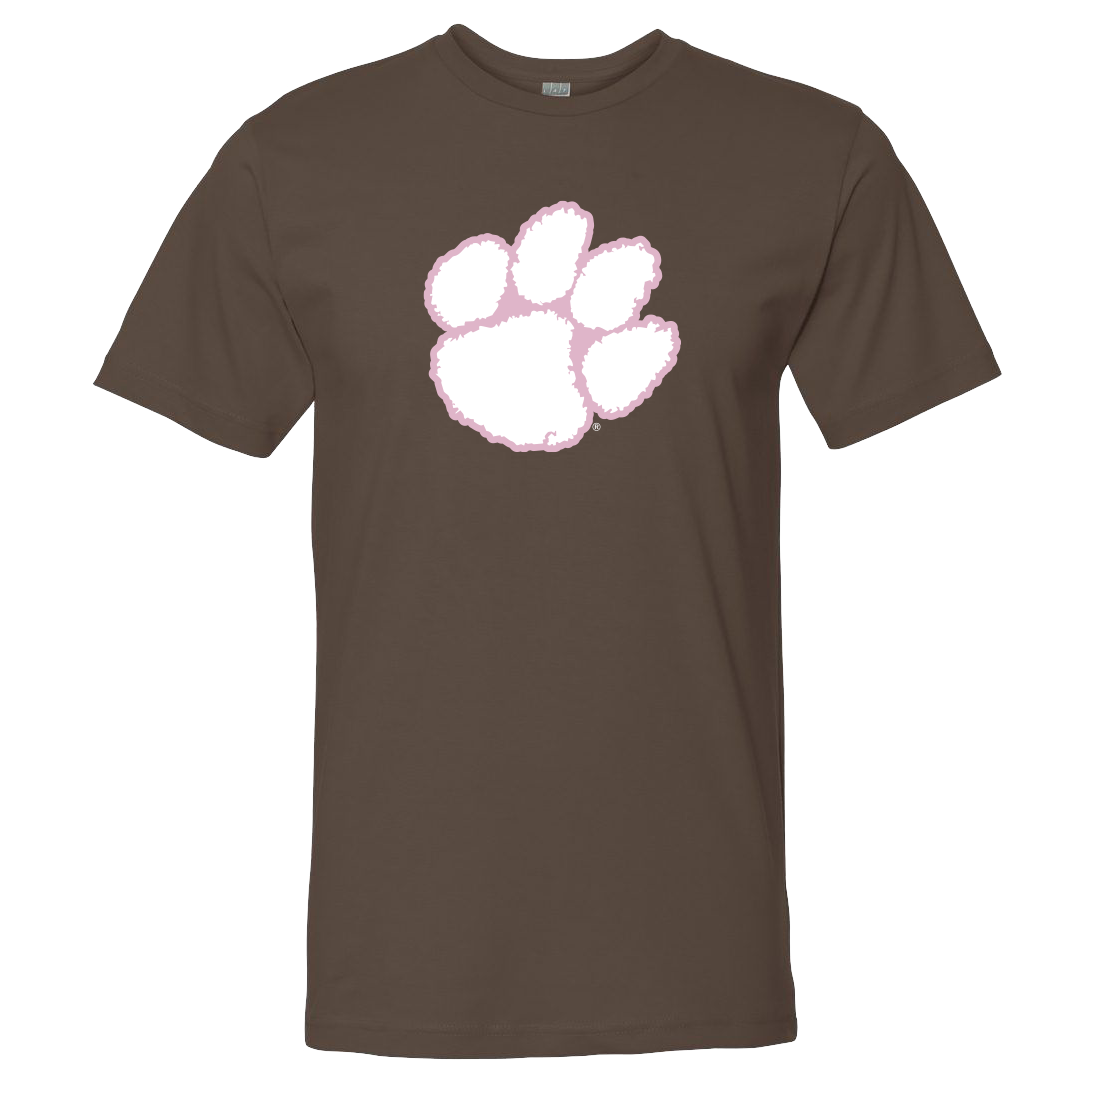 Classic Clemson White and Pink Paw Tee | Ladies Fit - Brown